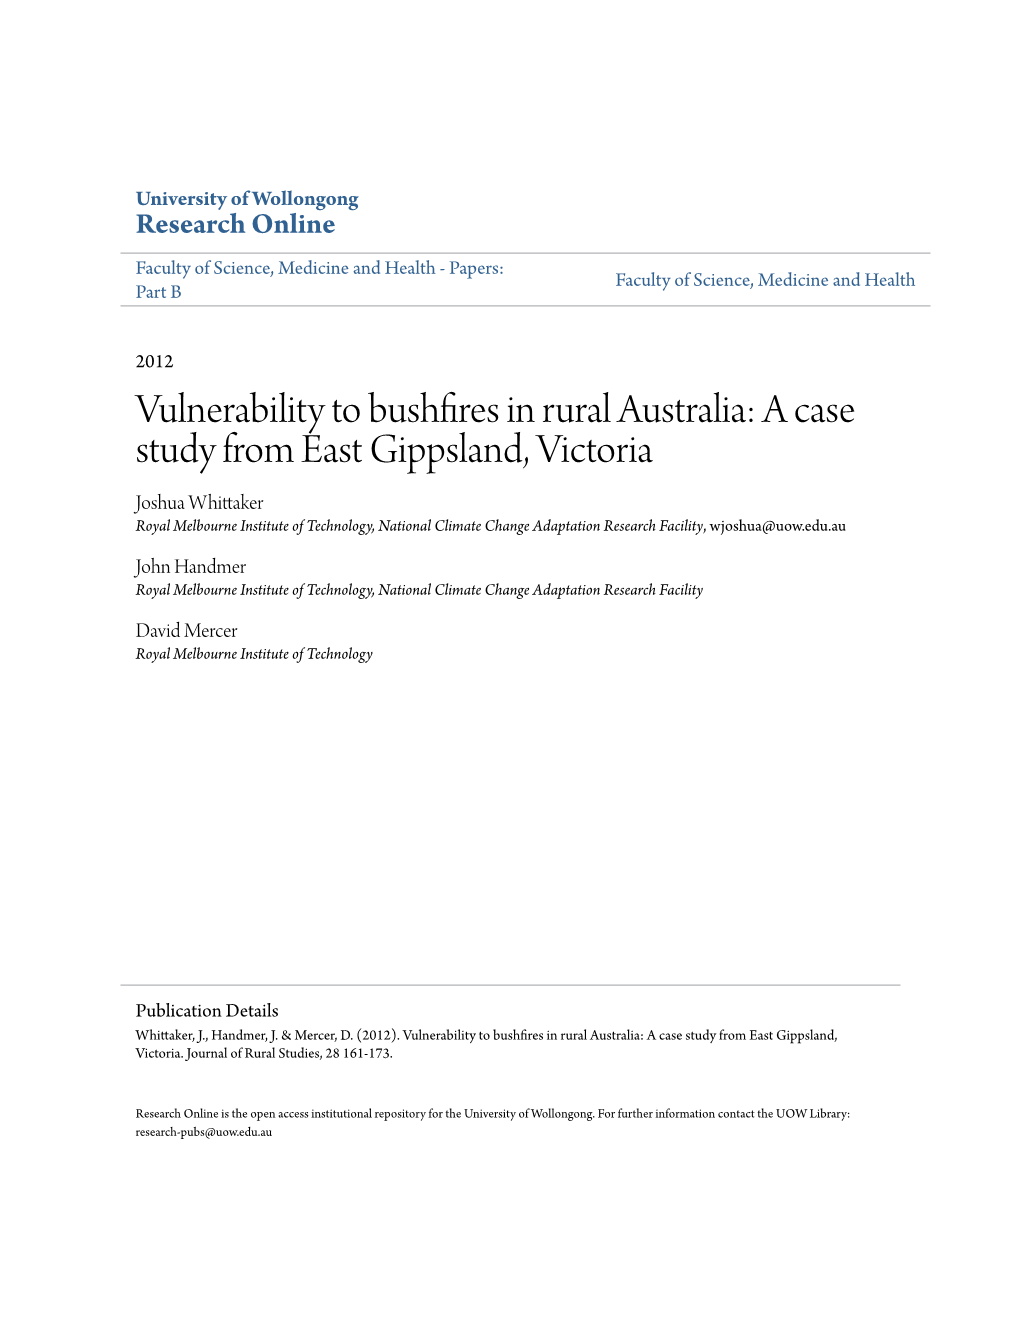 Vulnerability to Bushfires in Rural Australia: a Case Study from East